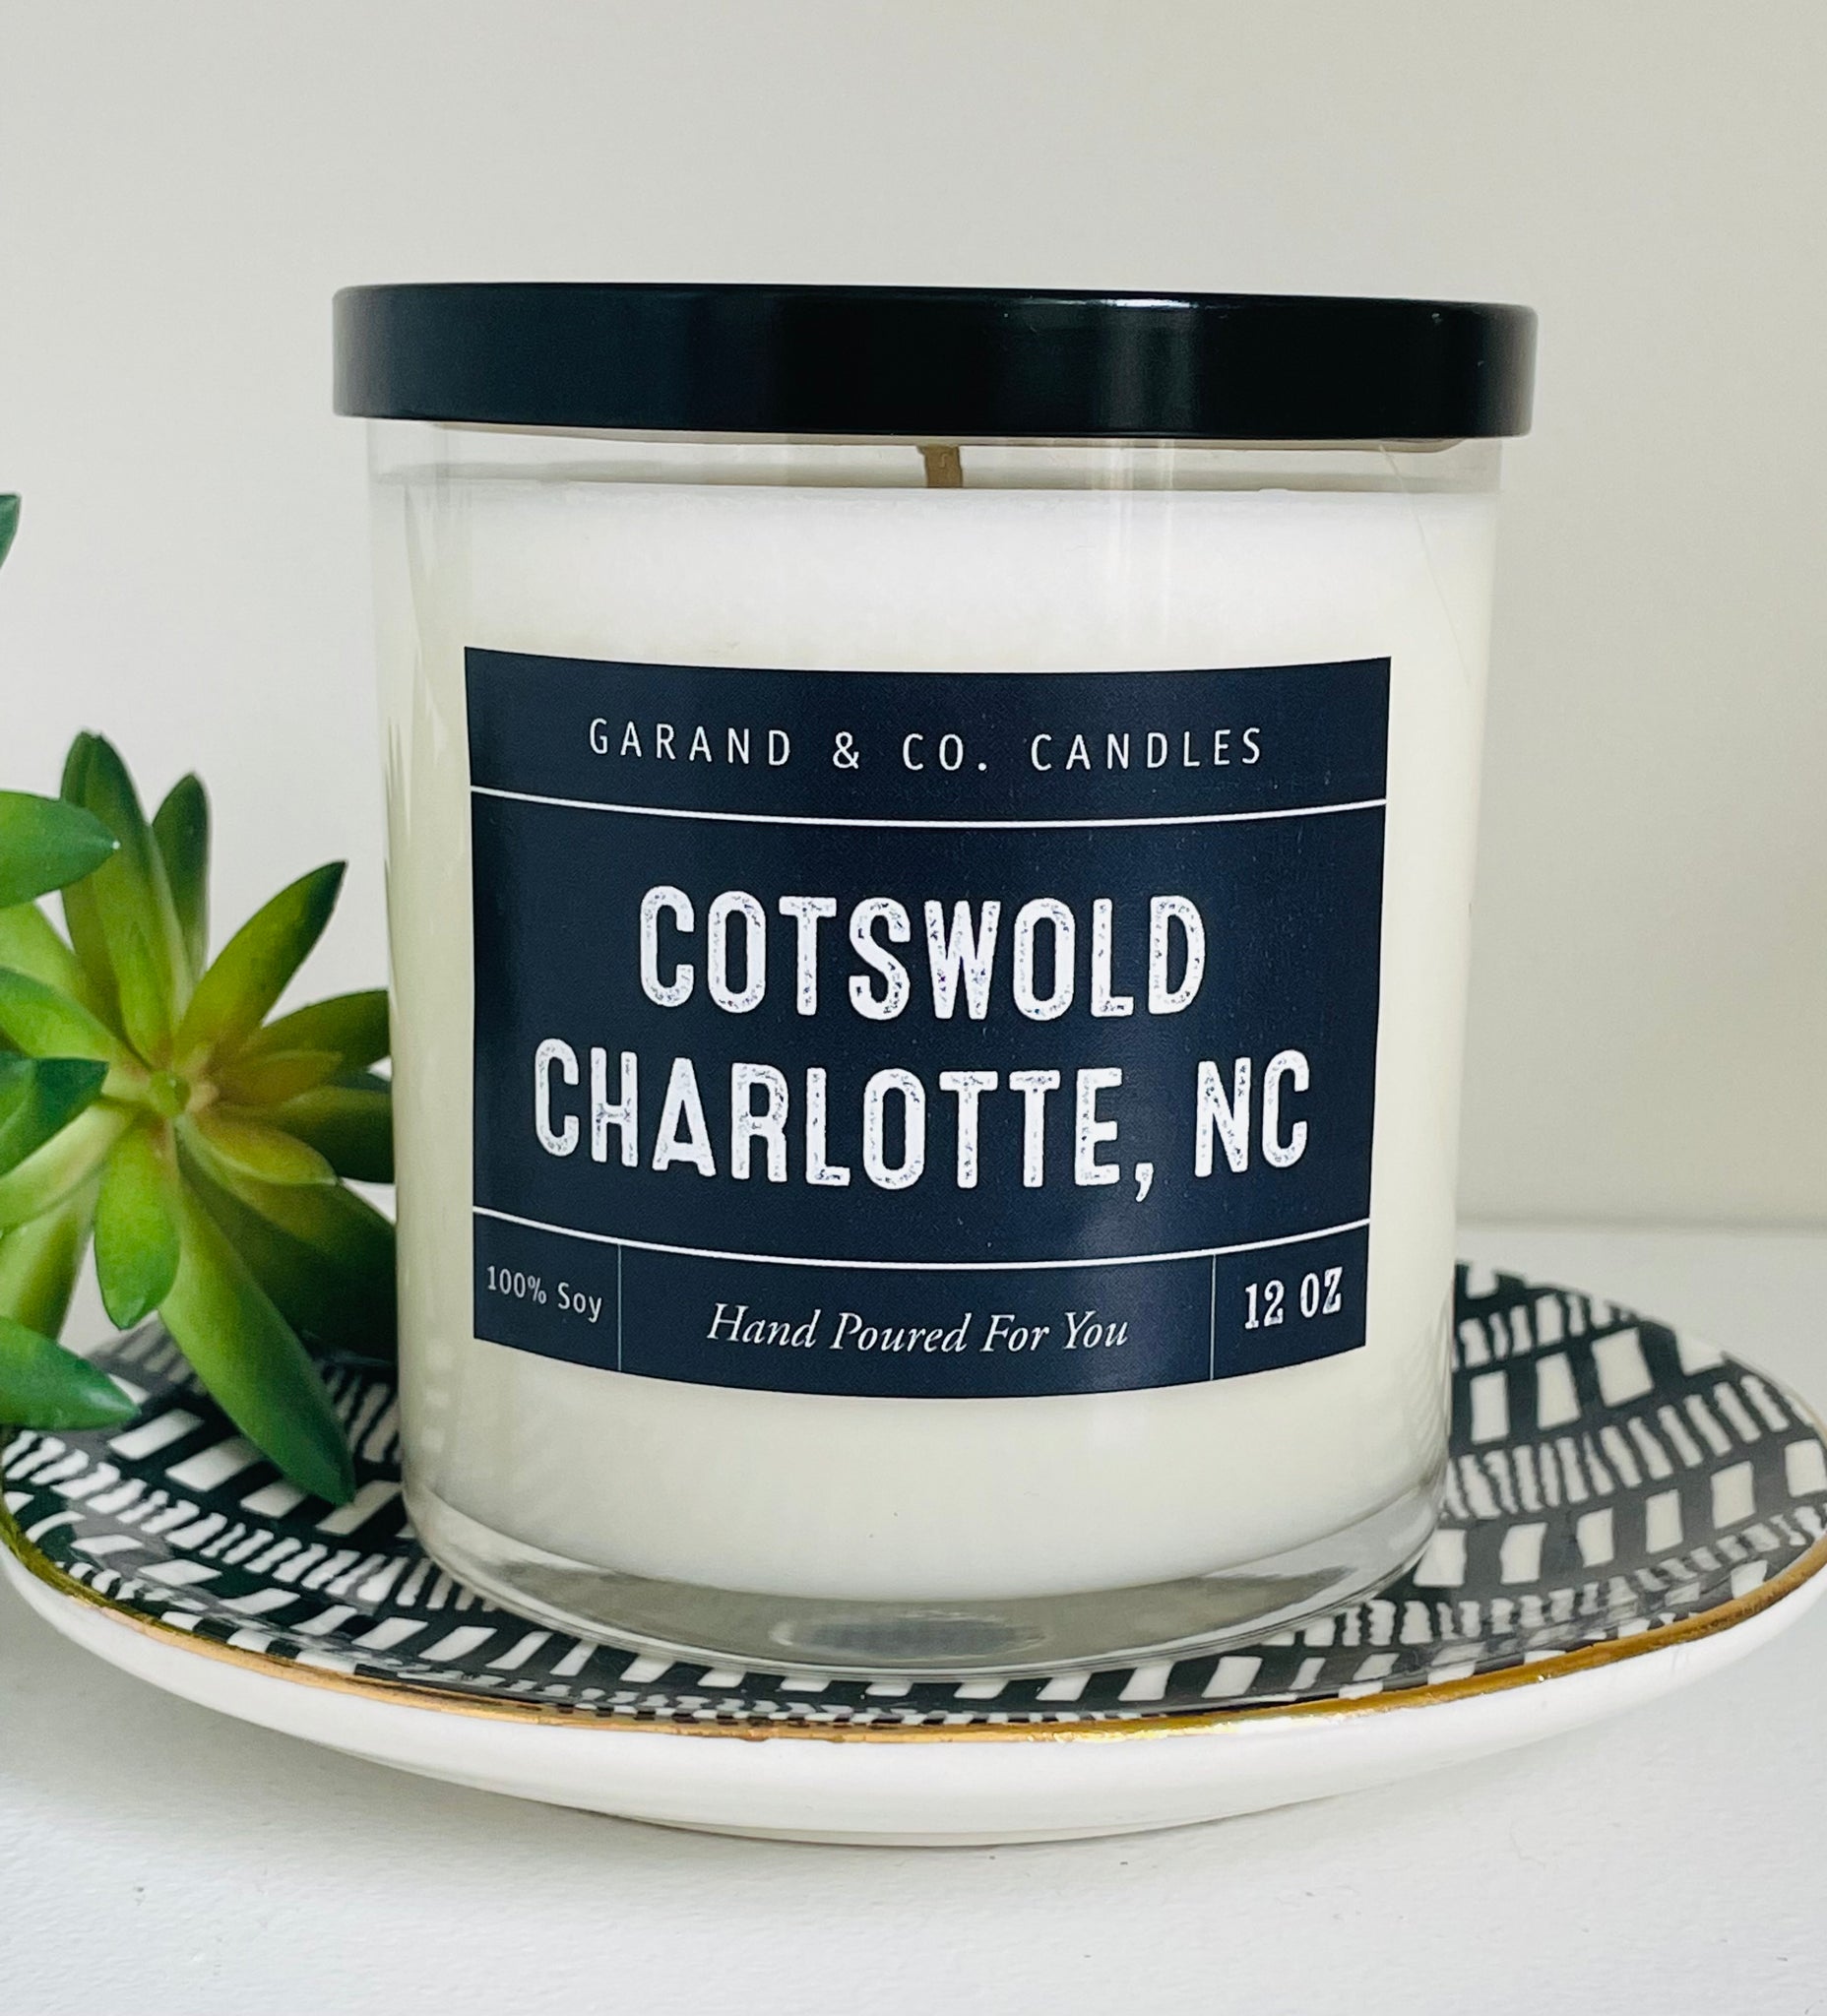 12 oz Clear Glass Jar Candle - Cotswold Charlotte, NC